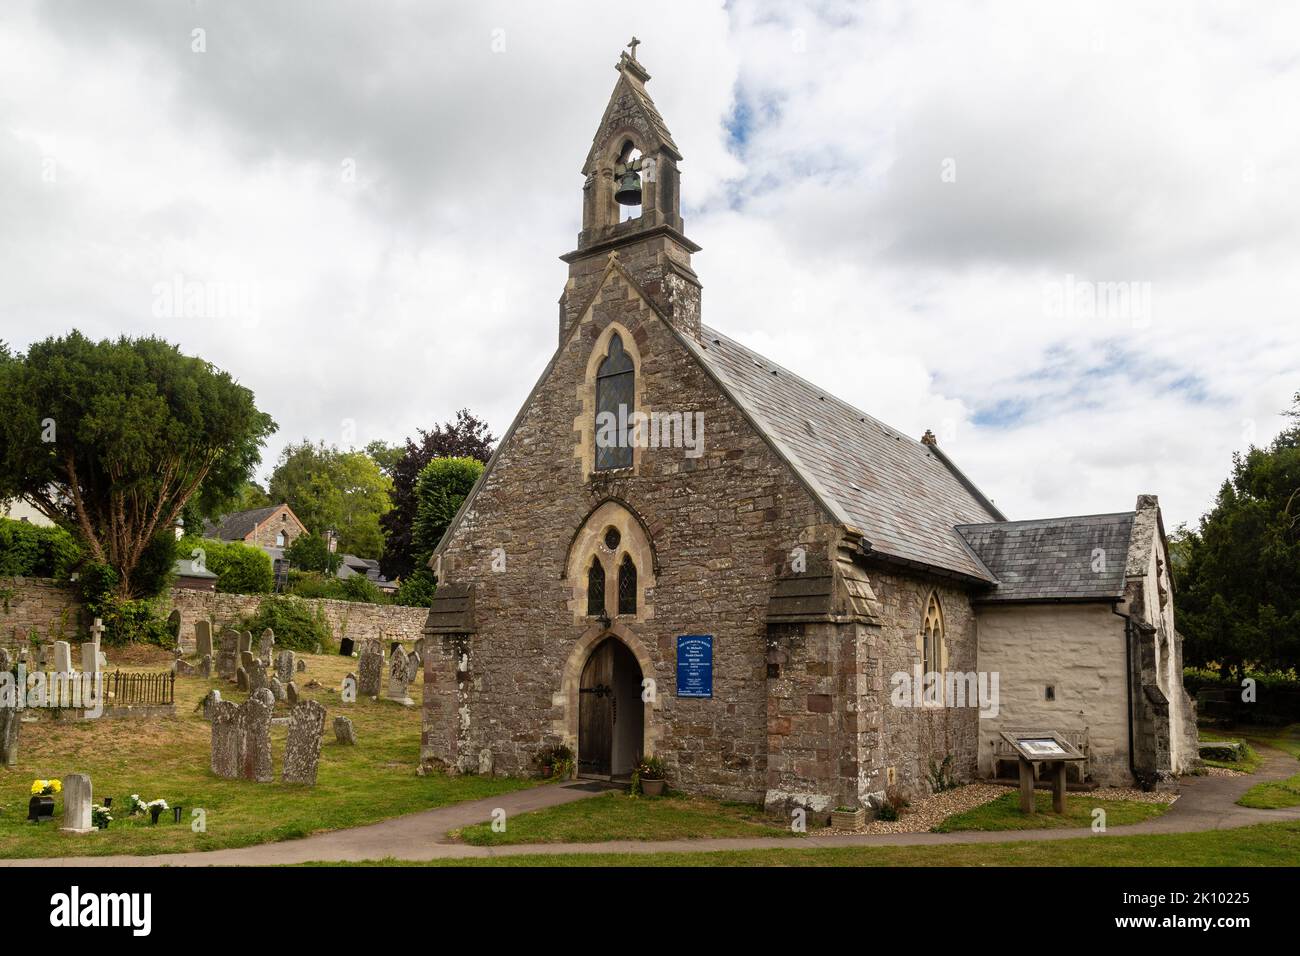 St. Michael's Chruch, Tintern, Monmouthshire, Wales Stockfoto